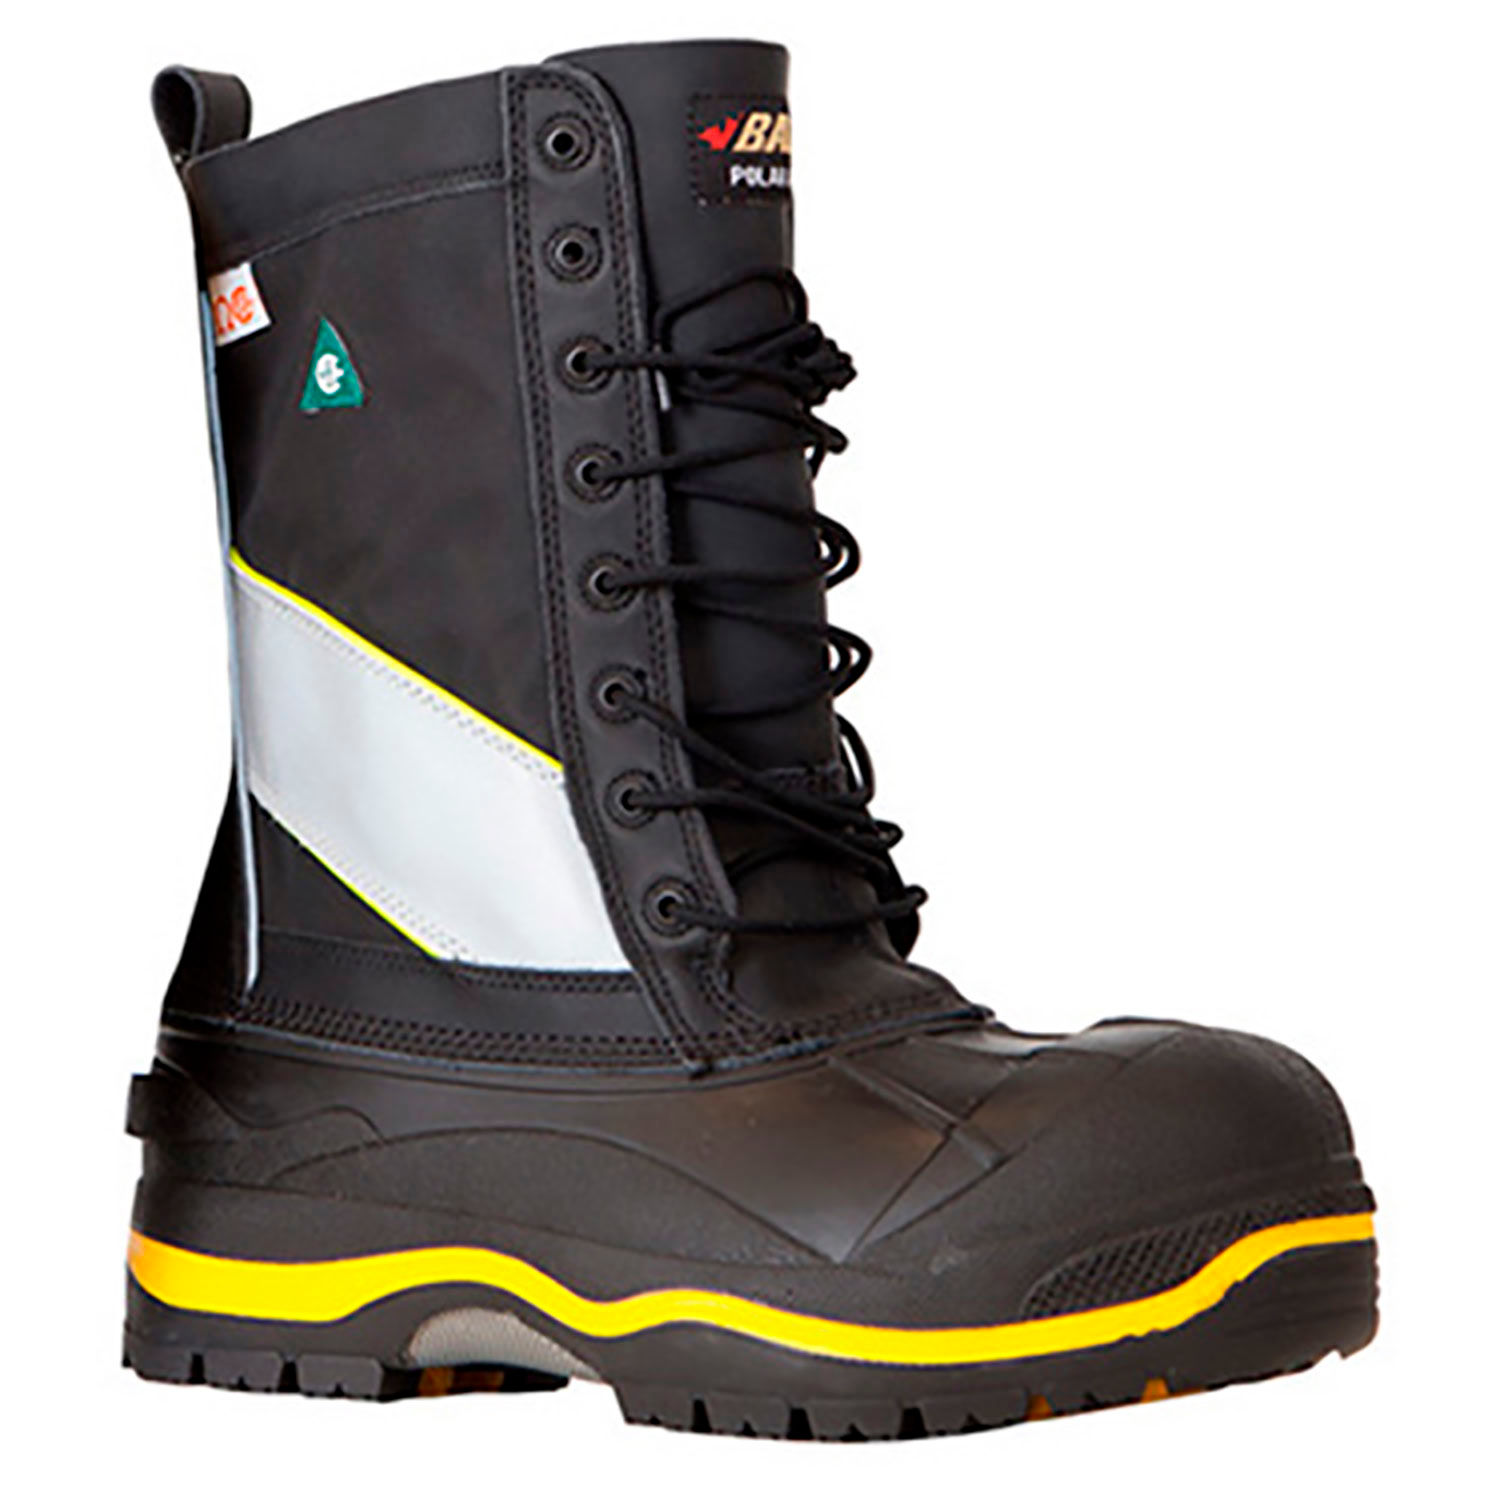 Foot Protection | Boots & Shoes | RefrigiWear Constructor Boots, Black ...